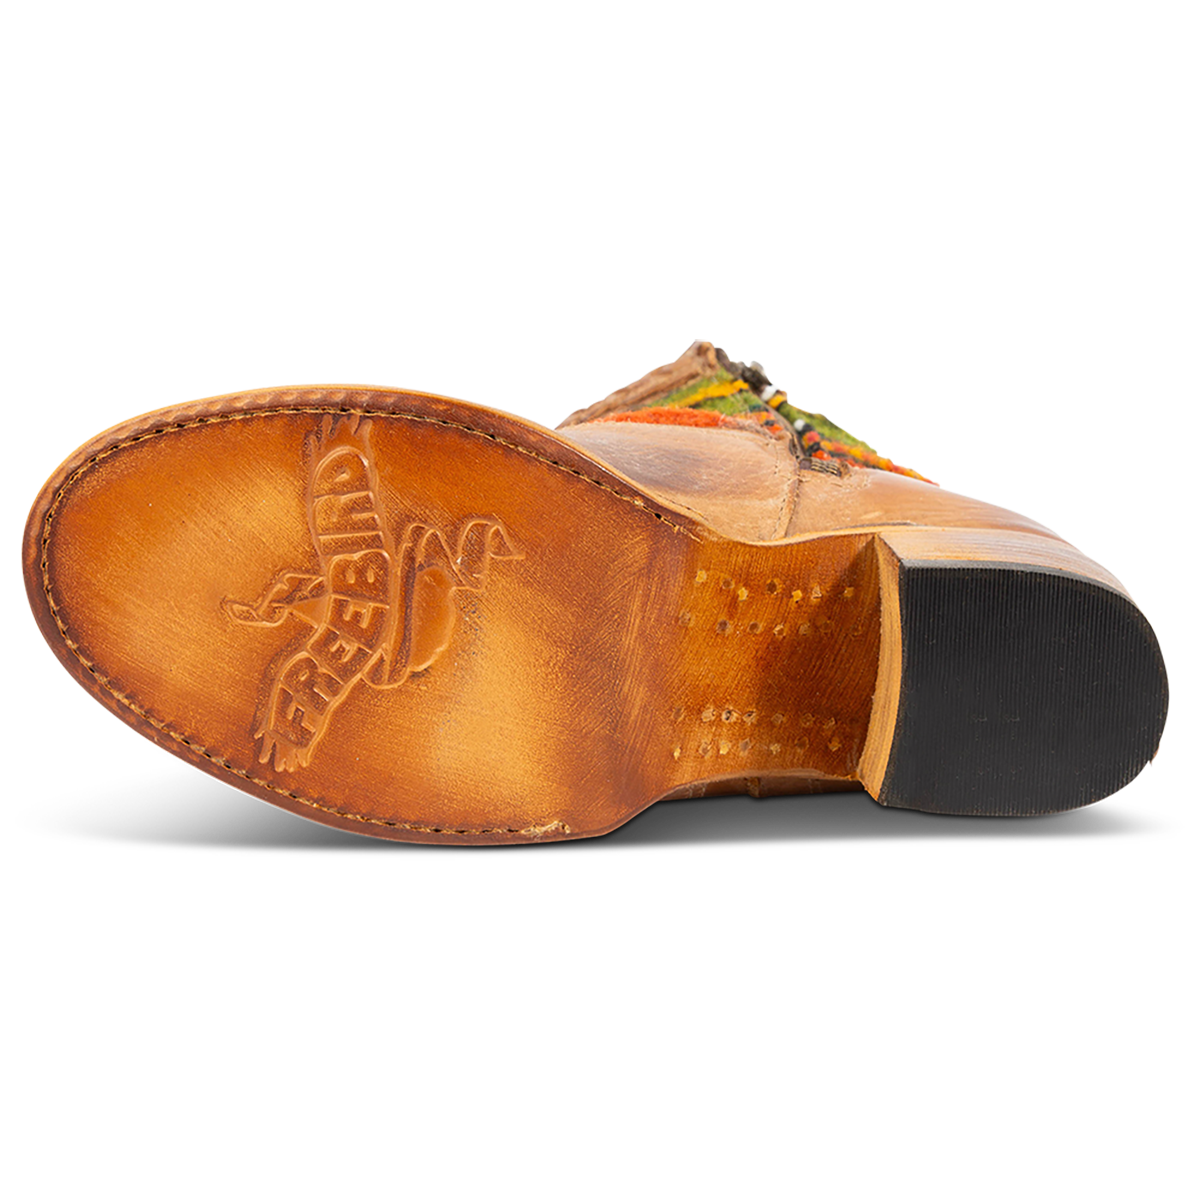 Leather sole imprinted with FREEBIRD on women's Songbird tan leather bootie